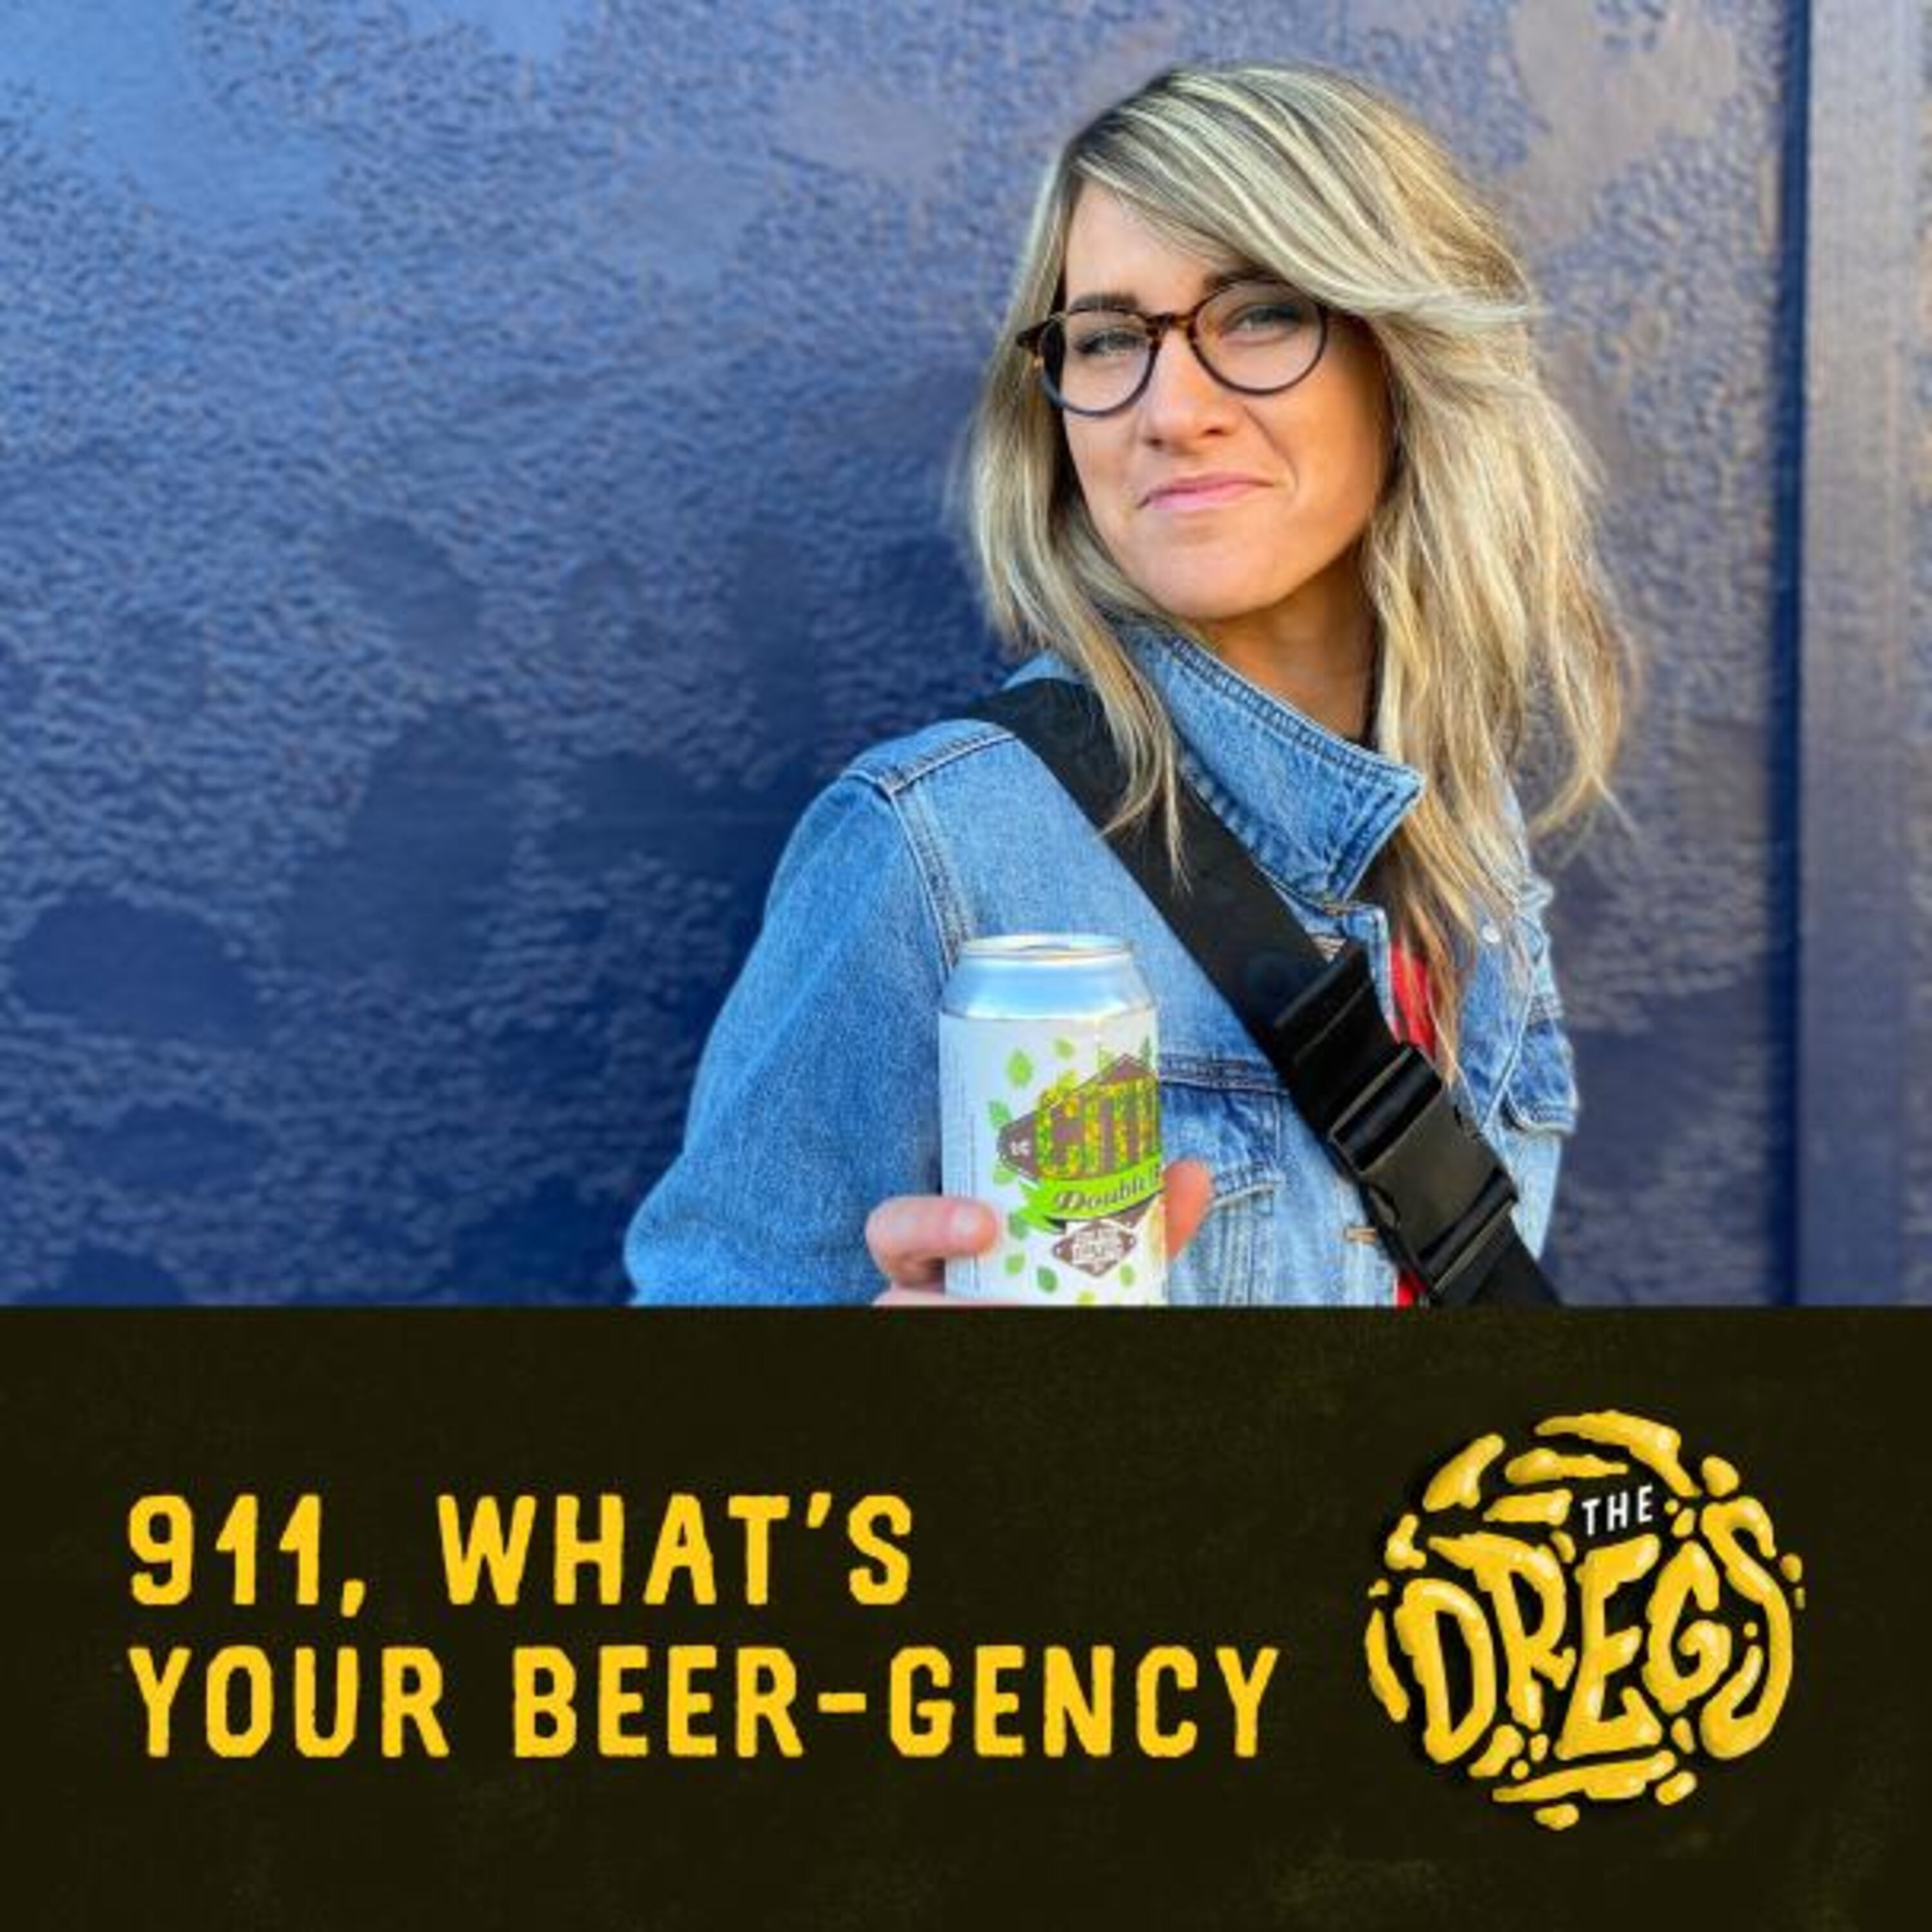 911, What's Your Beer-gency? Image